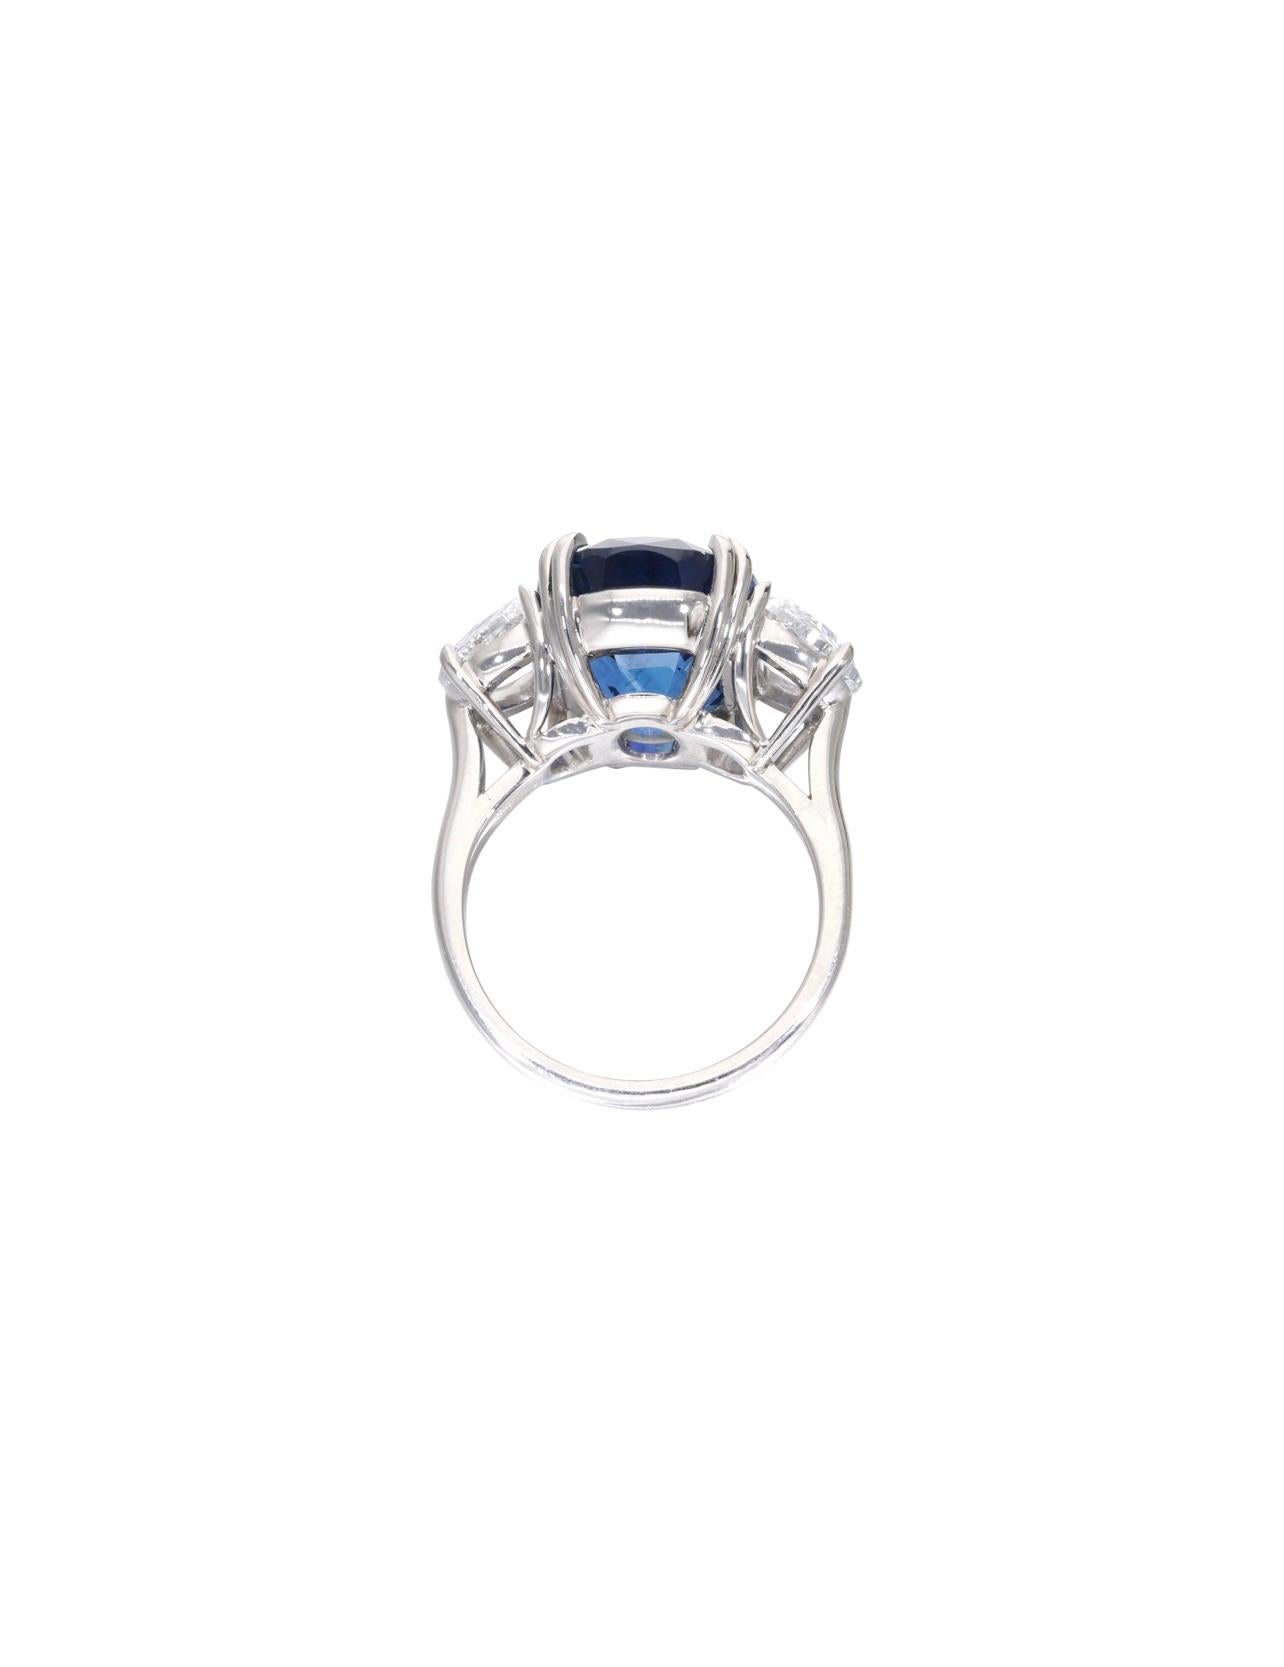 Contemporary 12.91 Carat Blue Sapphire Burma No Heat And Diamond Ring, Gubelin Certified.  For Sale